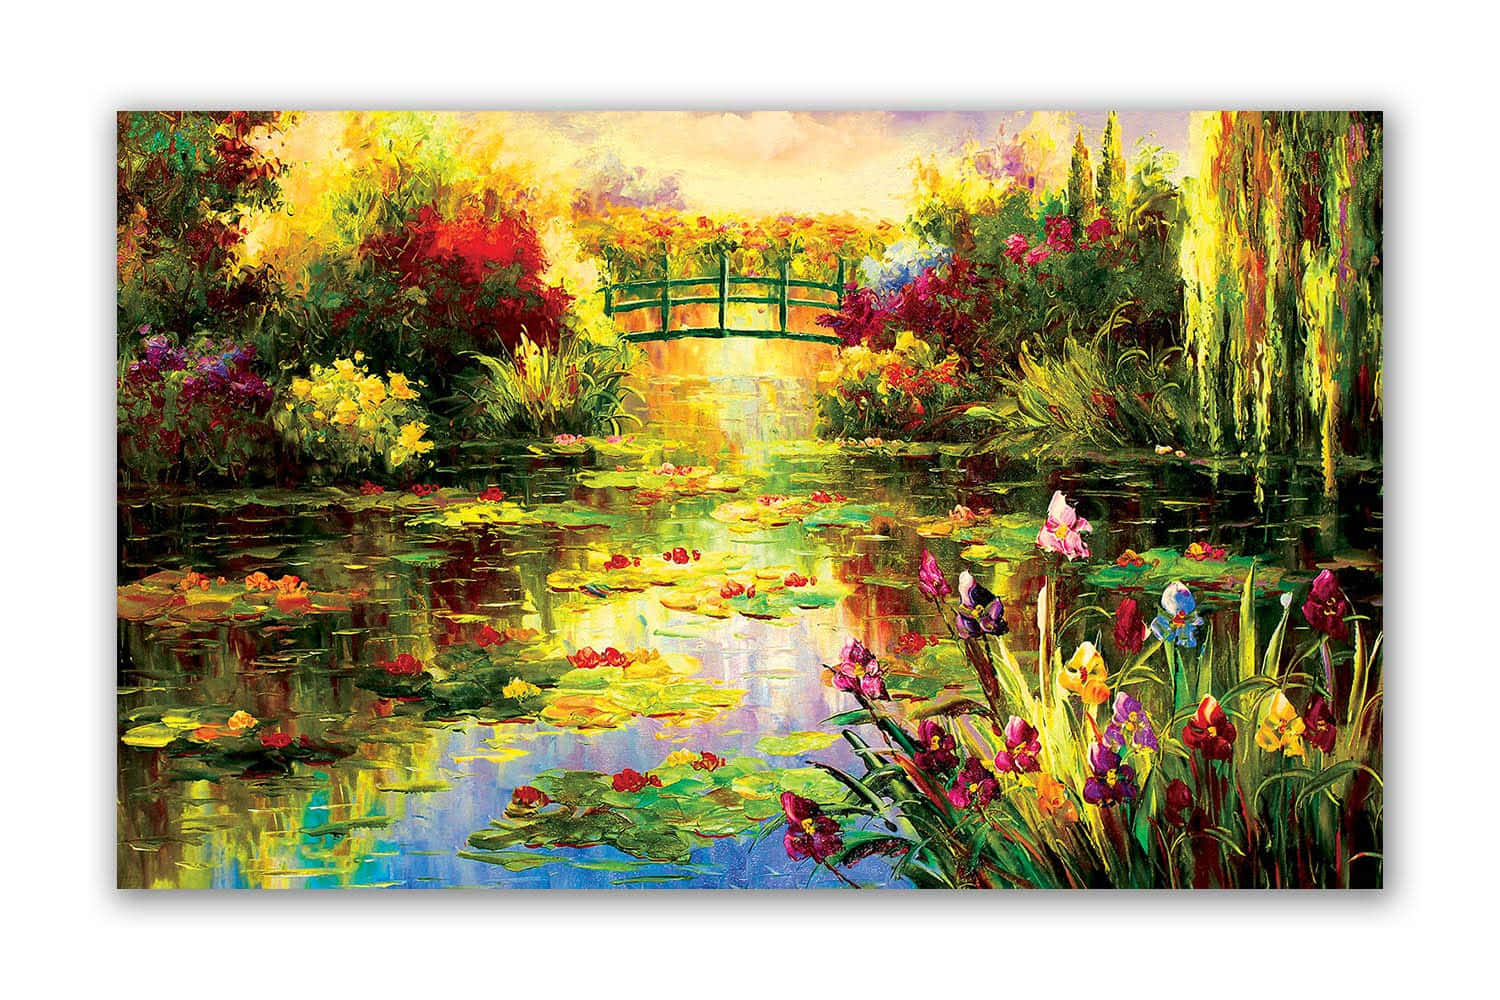 A Painting Of A Pond With Water Lilies And A Bridge